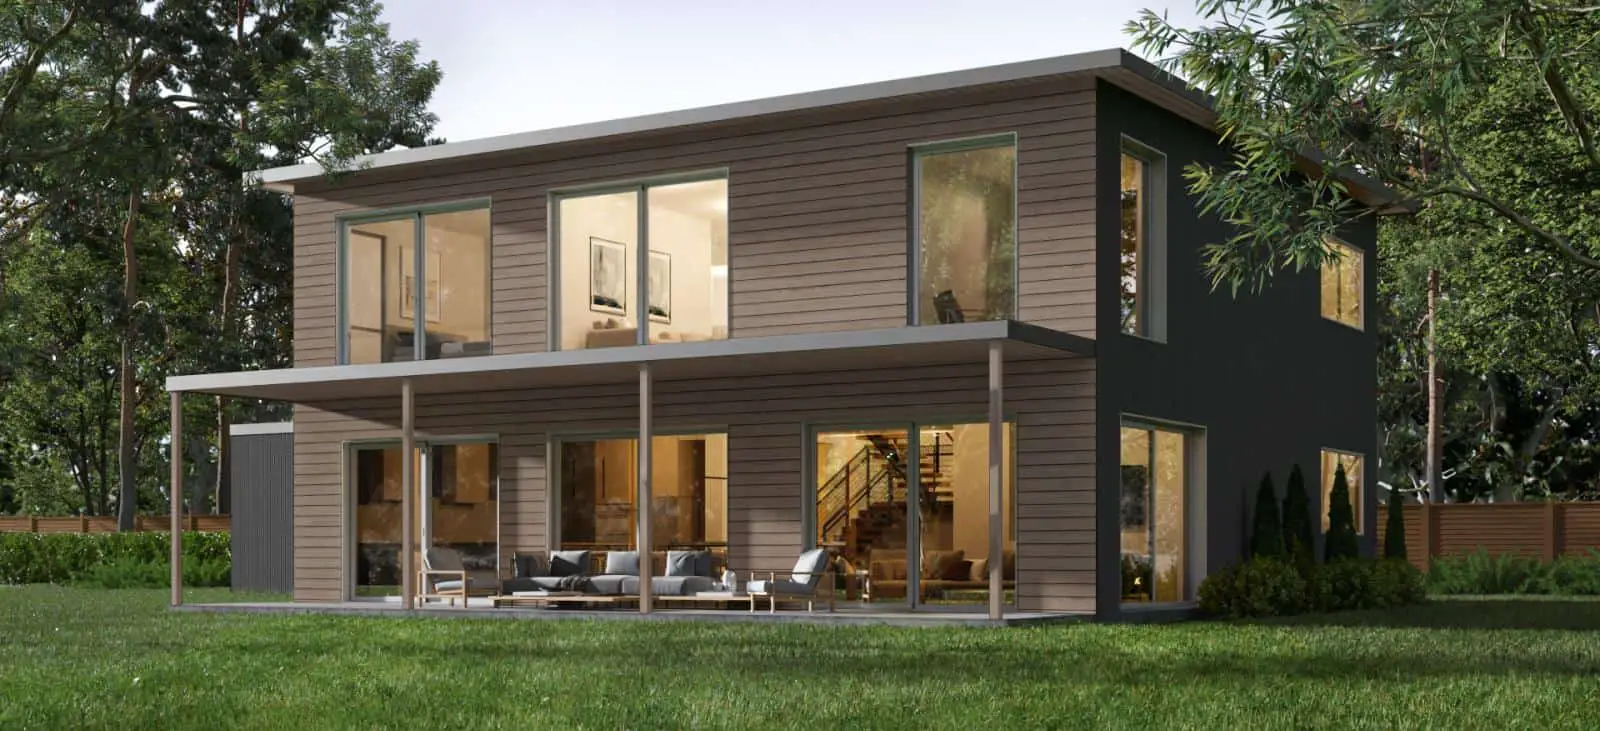 Trinity modern prefab home by Dvele rear exterior showing full-length covered deck and balcony.